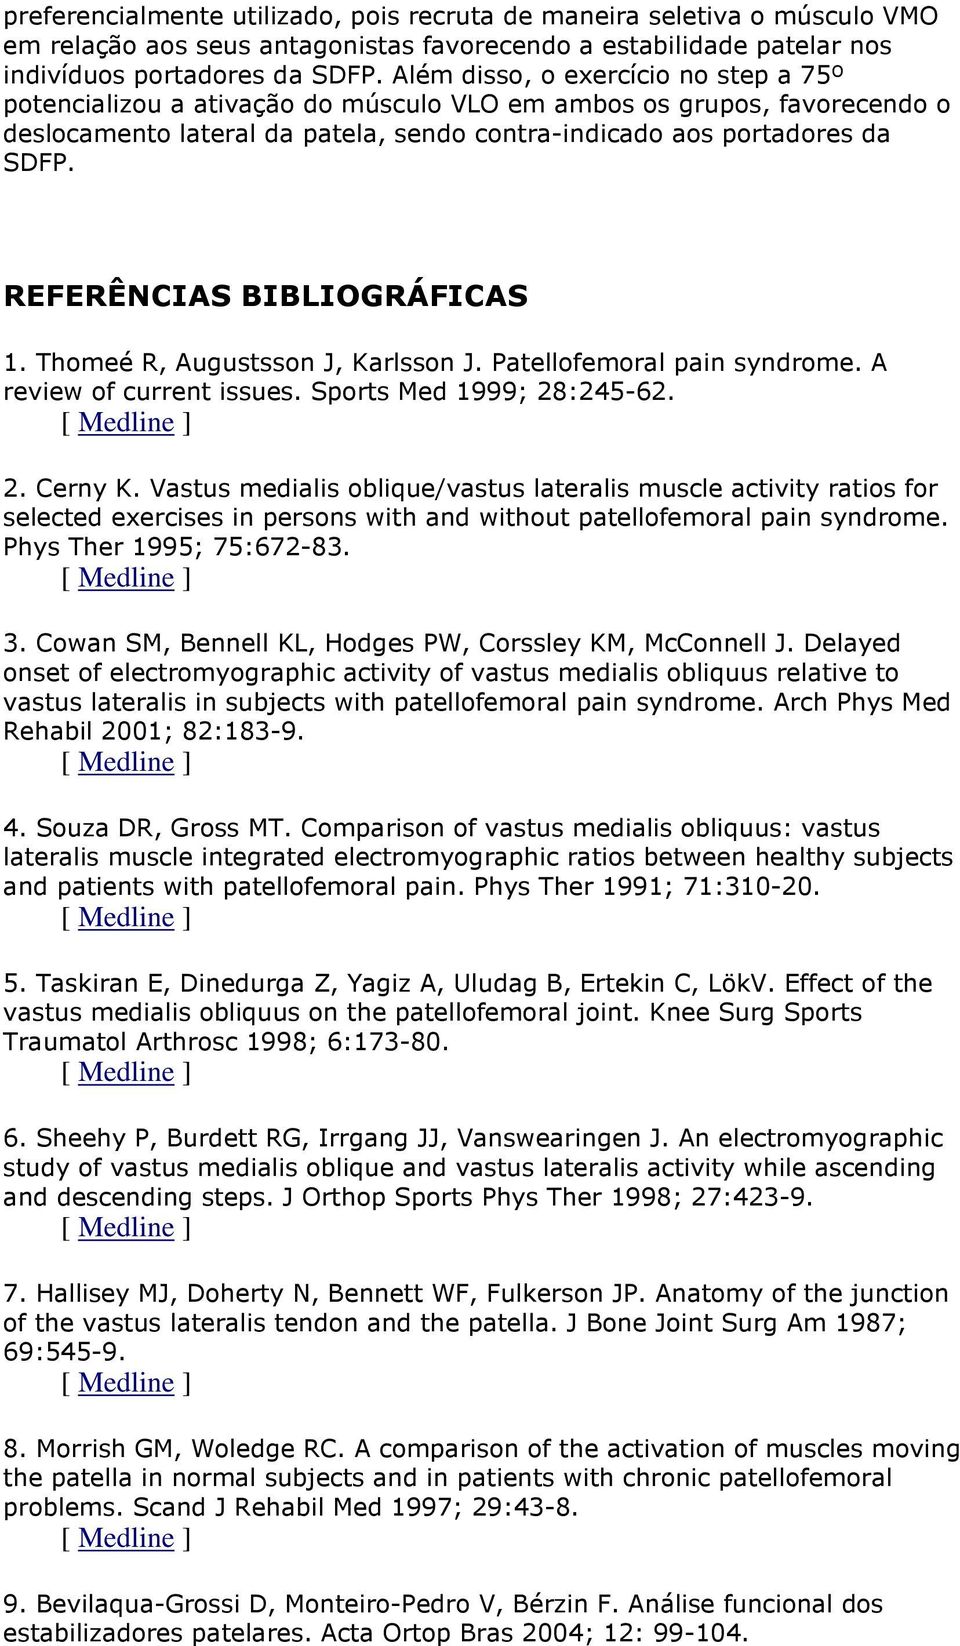 REFERÊNCIAS BIBLIOGRÁFICAS 1. Thomeé R, Augustsson J, Karlsson J. Patellofemoral pain syndrome. A review of current issues. Sports Med 1999; 28:245-62. 2. Cerny K.